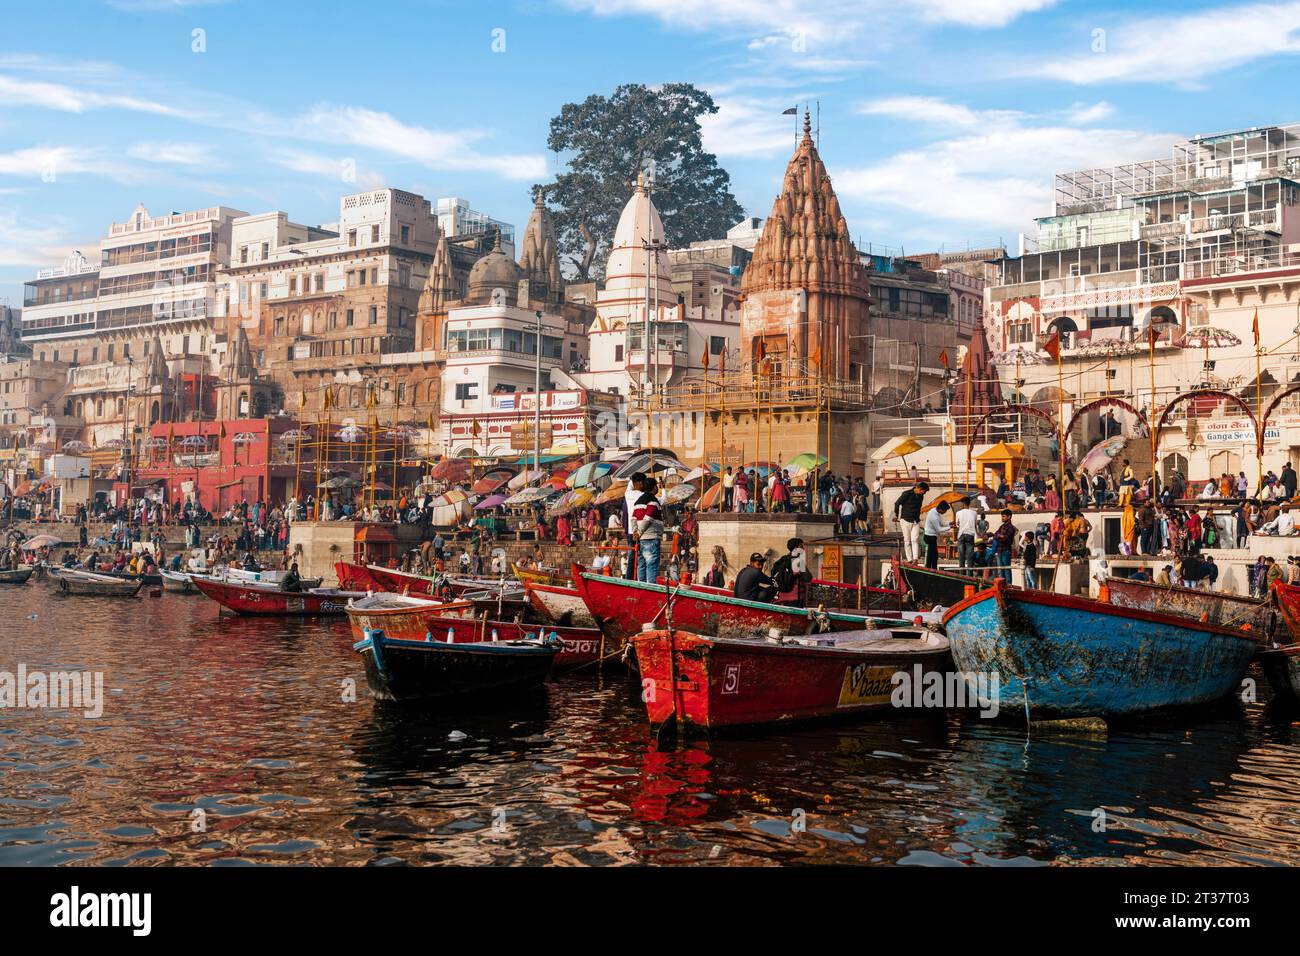 Colourful scene showing boats on the sacred Ganges River at Dashashwamedh Ghat in the holy city of Varanasi, Uttar Pradesh, India. Stock Photo